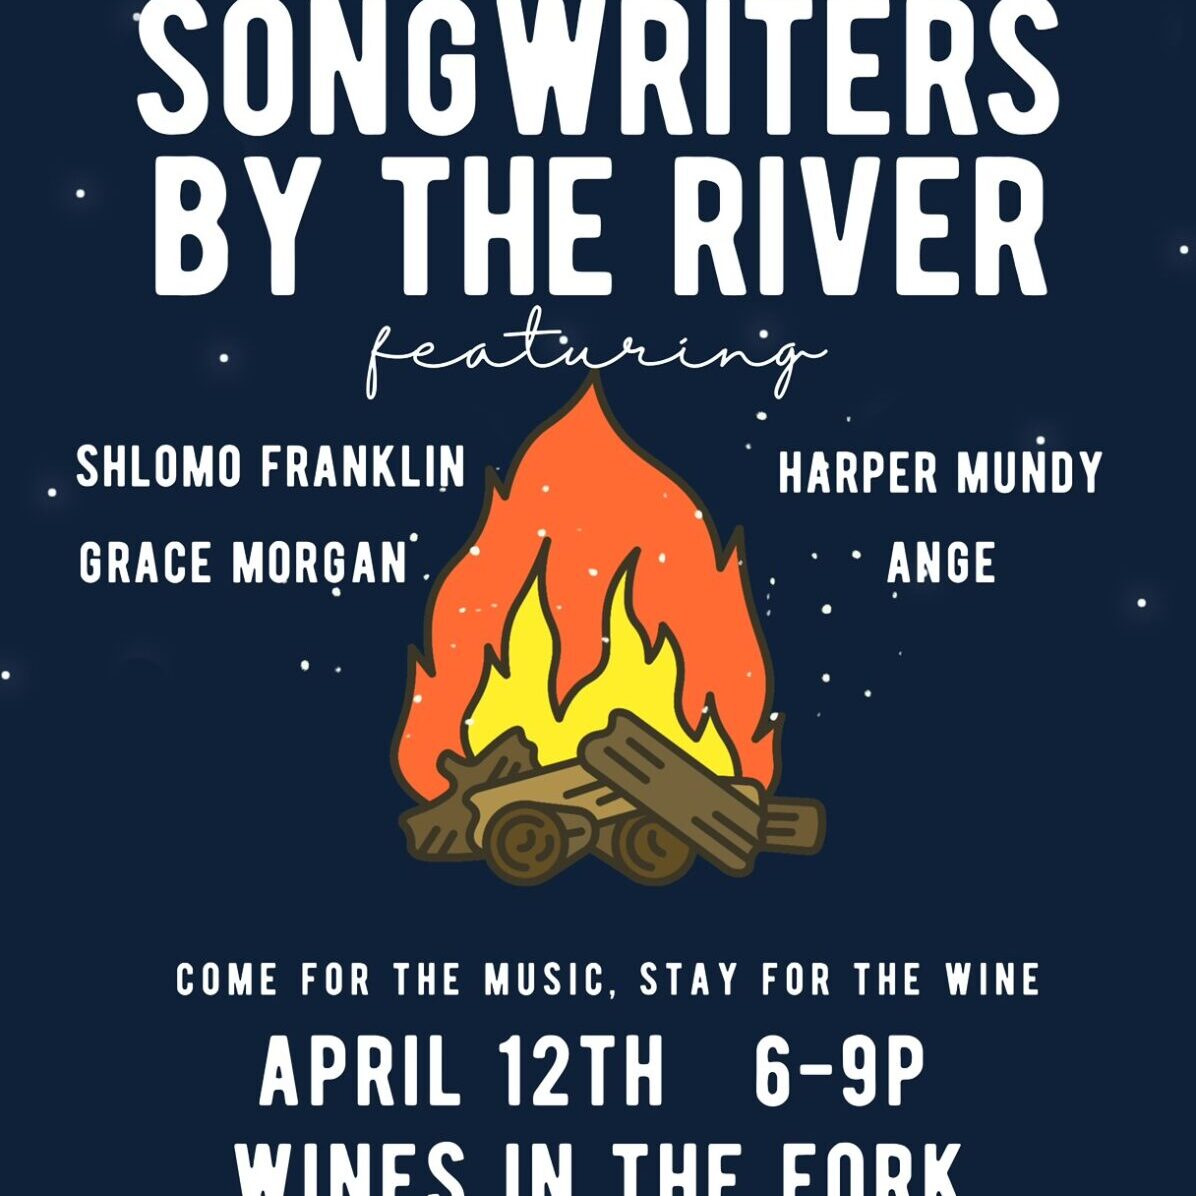 Songwriters by the River FLYER - 2